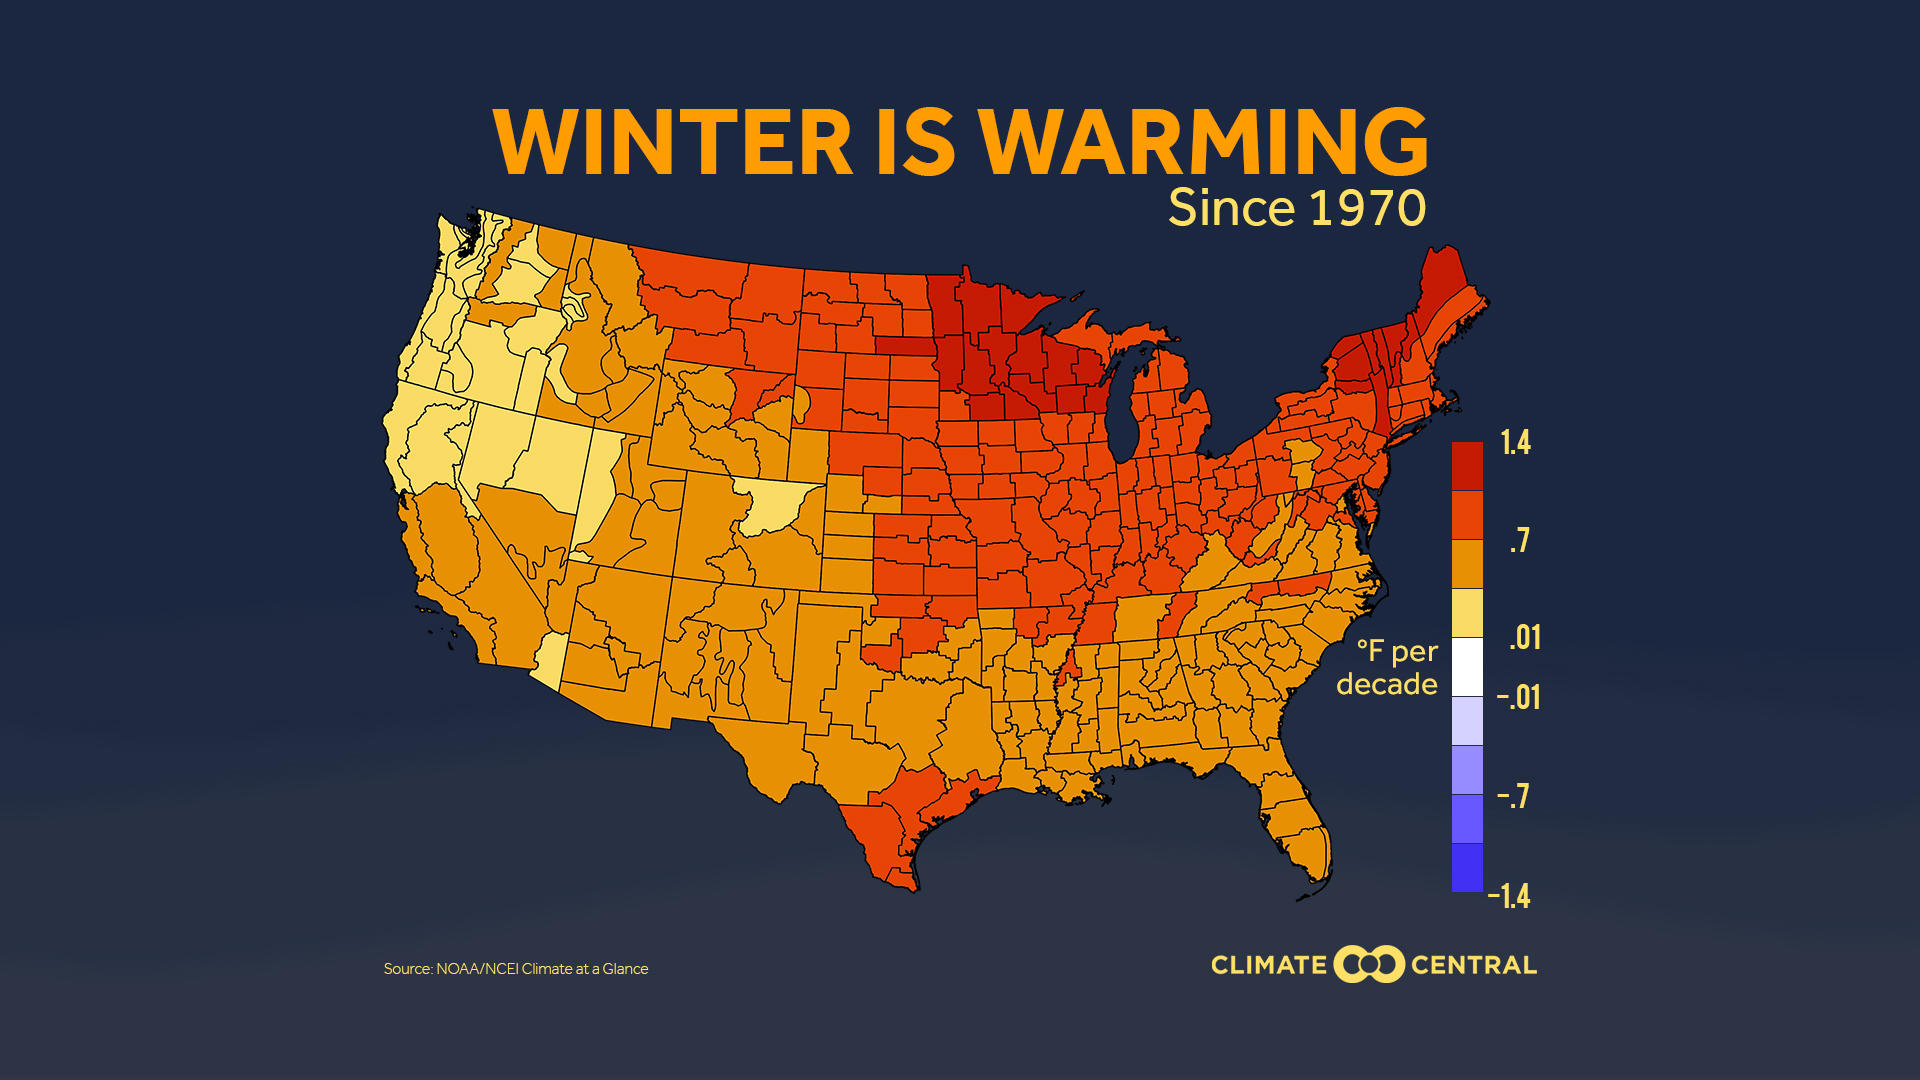 Vermont, Minnesota warming faster in winter than any other area in U.S